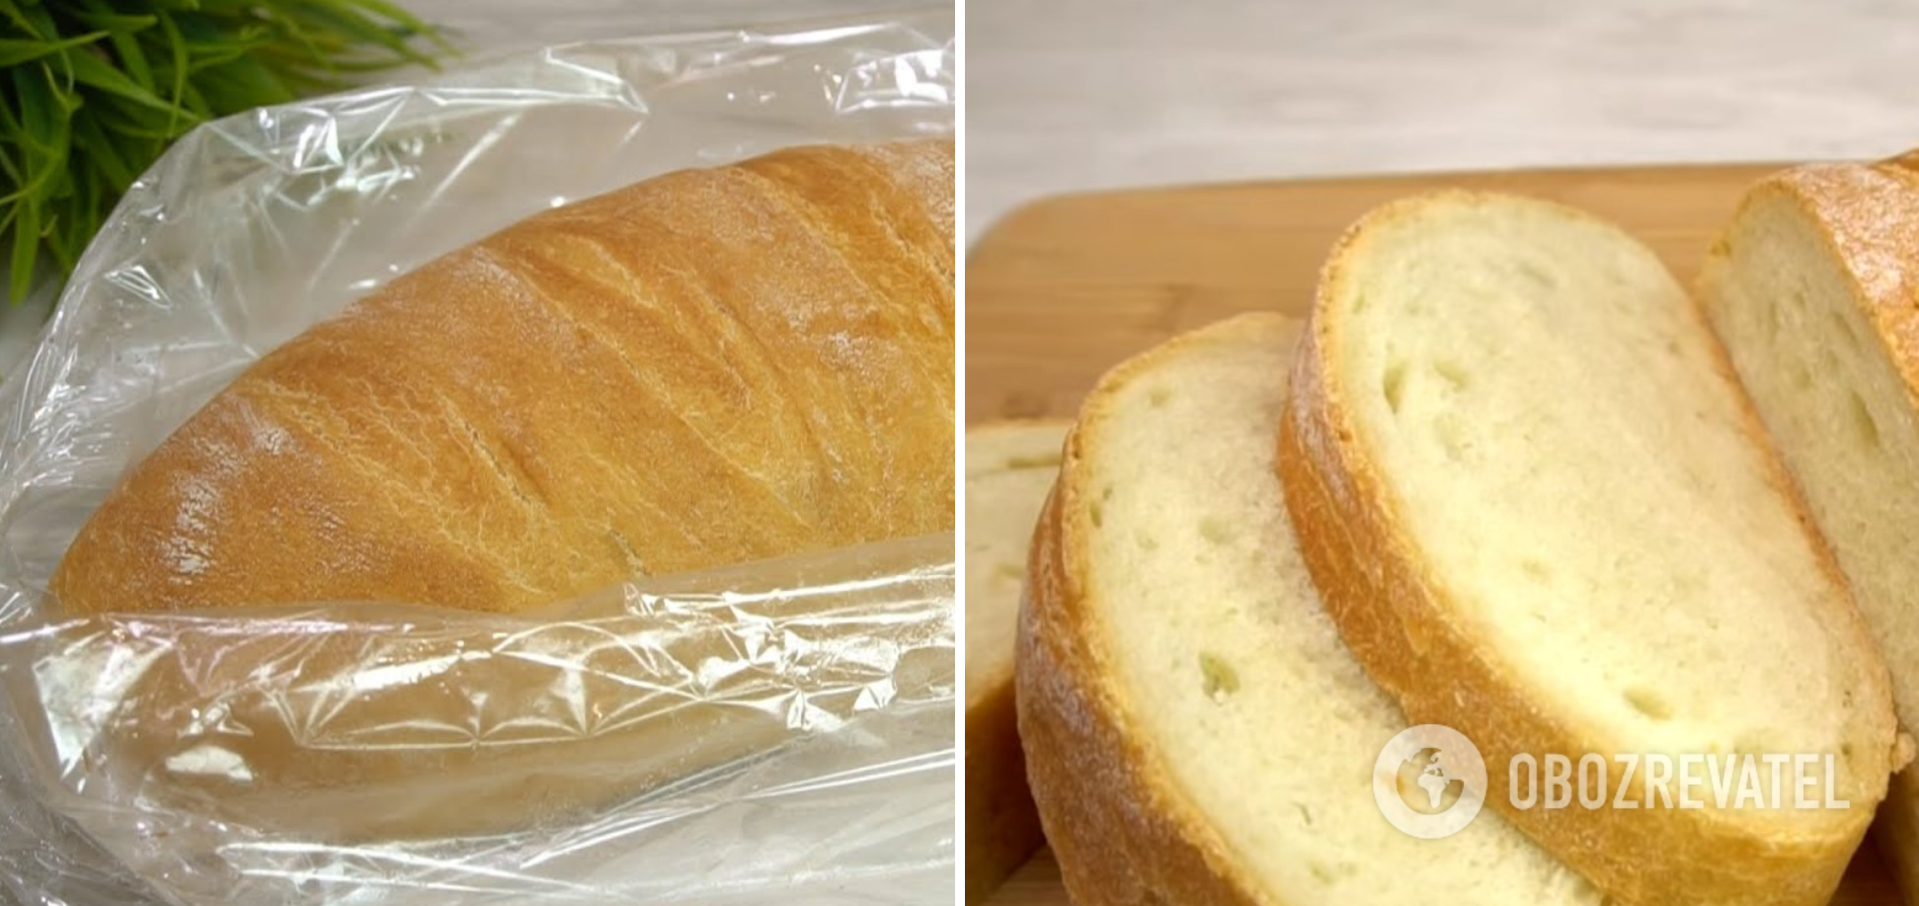 How to bake bread in a sleeve